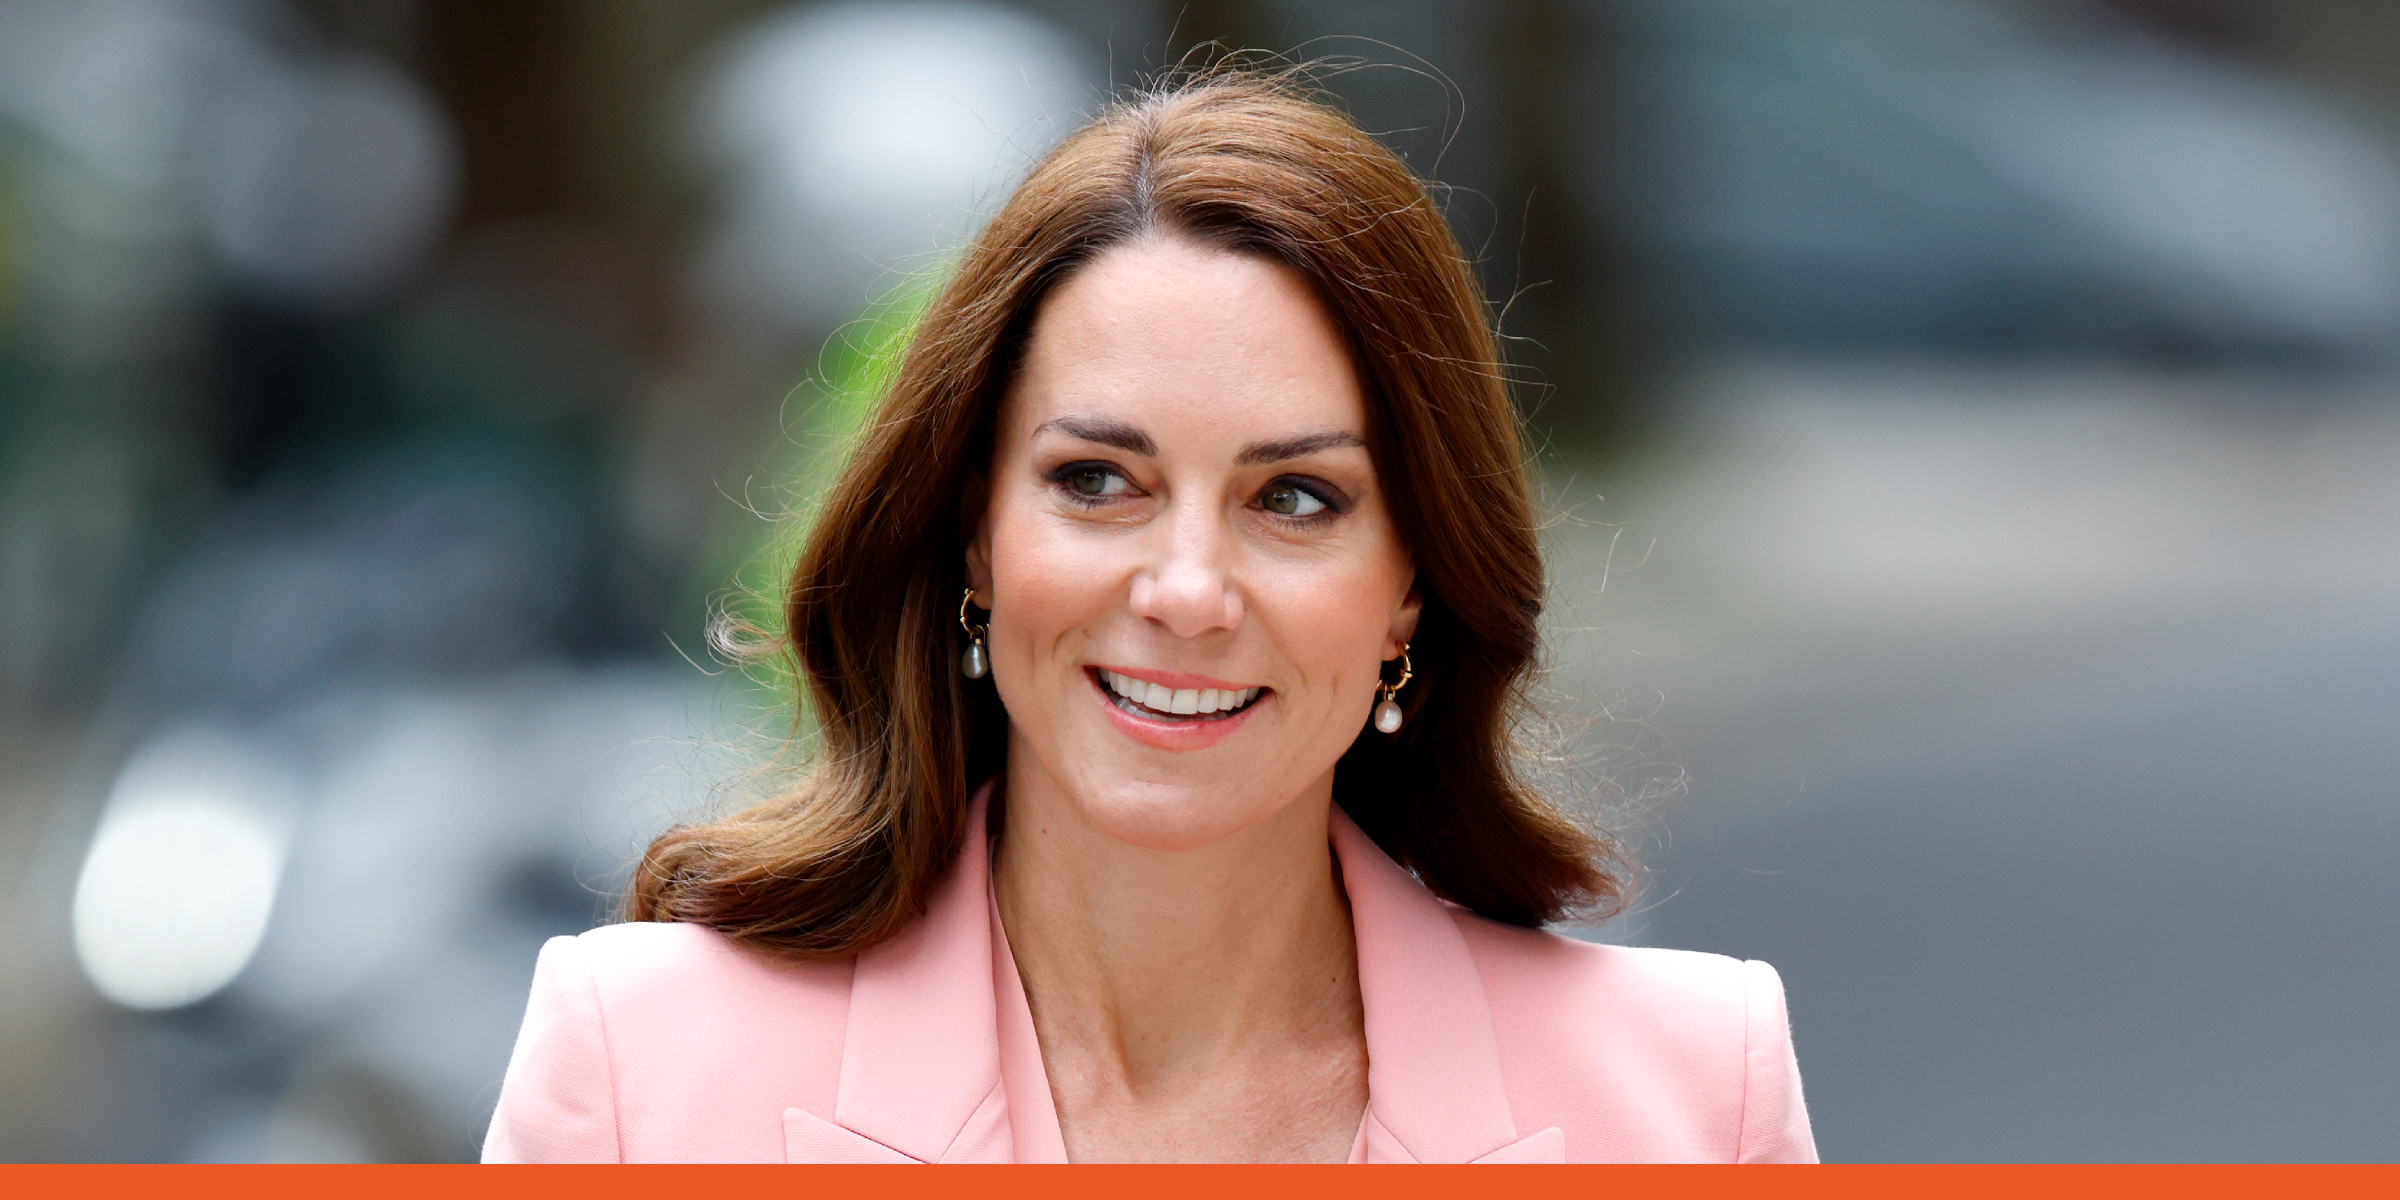 Princess Catherine | Source: Getty Images